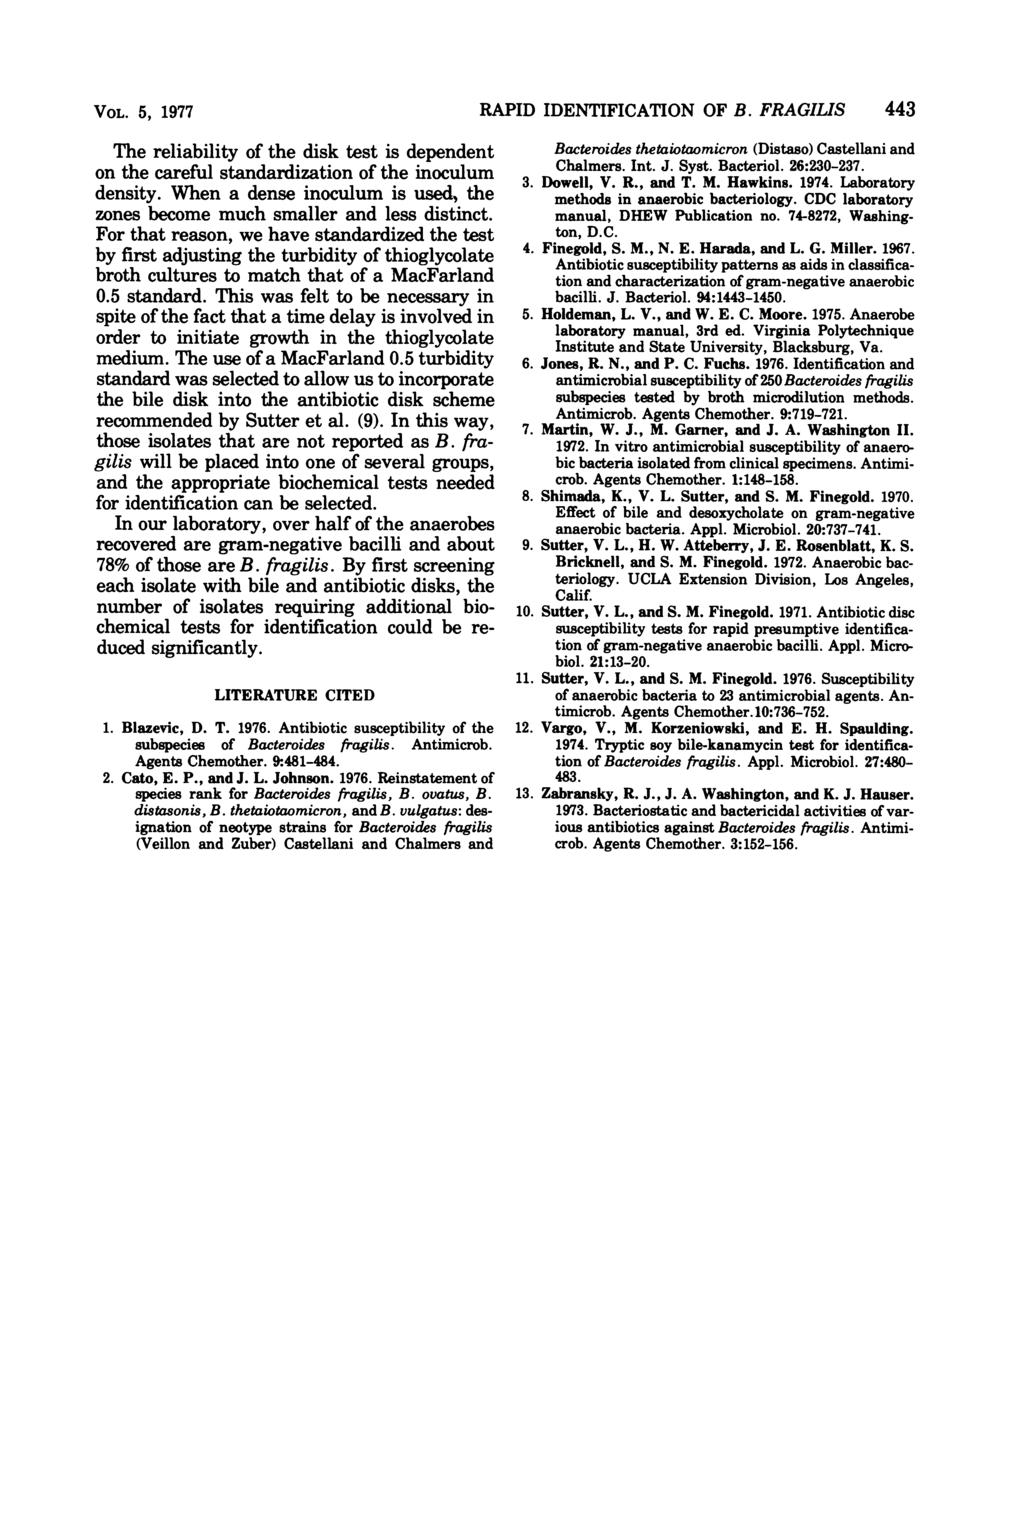 VOL. 5, 1977 The reliability of the disk test is dependent on the careful standardization of the inoculum density. When a dense inoculum is used, the zones become much smaller and less distinct.